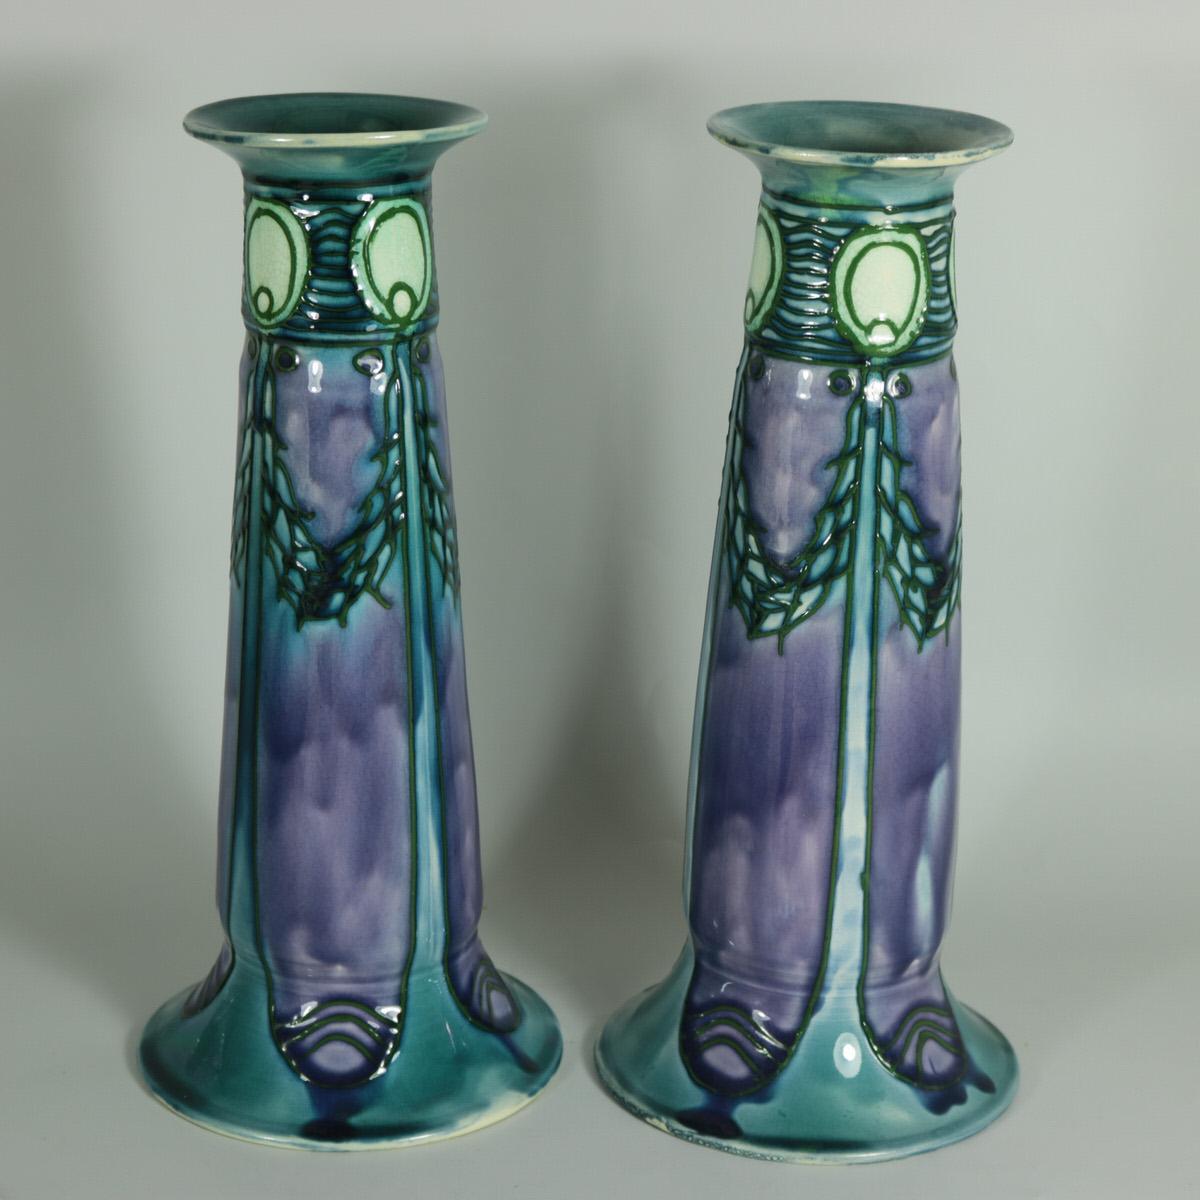 Pair of Minton Secessionist No.1 vases with purple, blue and white slip-trailed decoration. Art nouveau stylised patterns. Dark green tube lined outlines. Cream interior and base. Maker's marks including printed 'MINTONS LTD NO.1' to bases, also